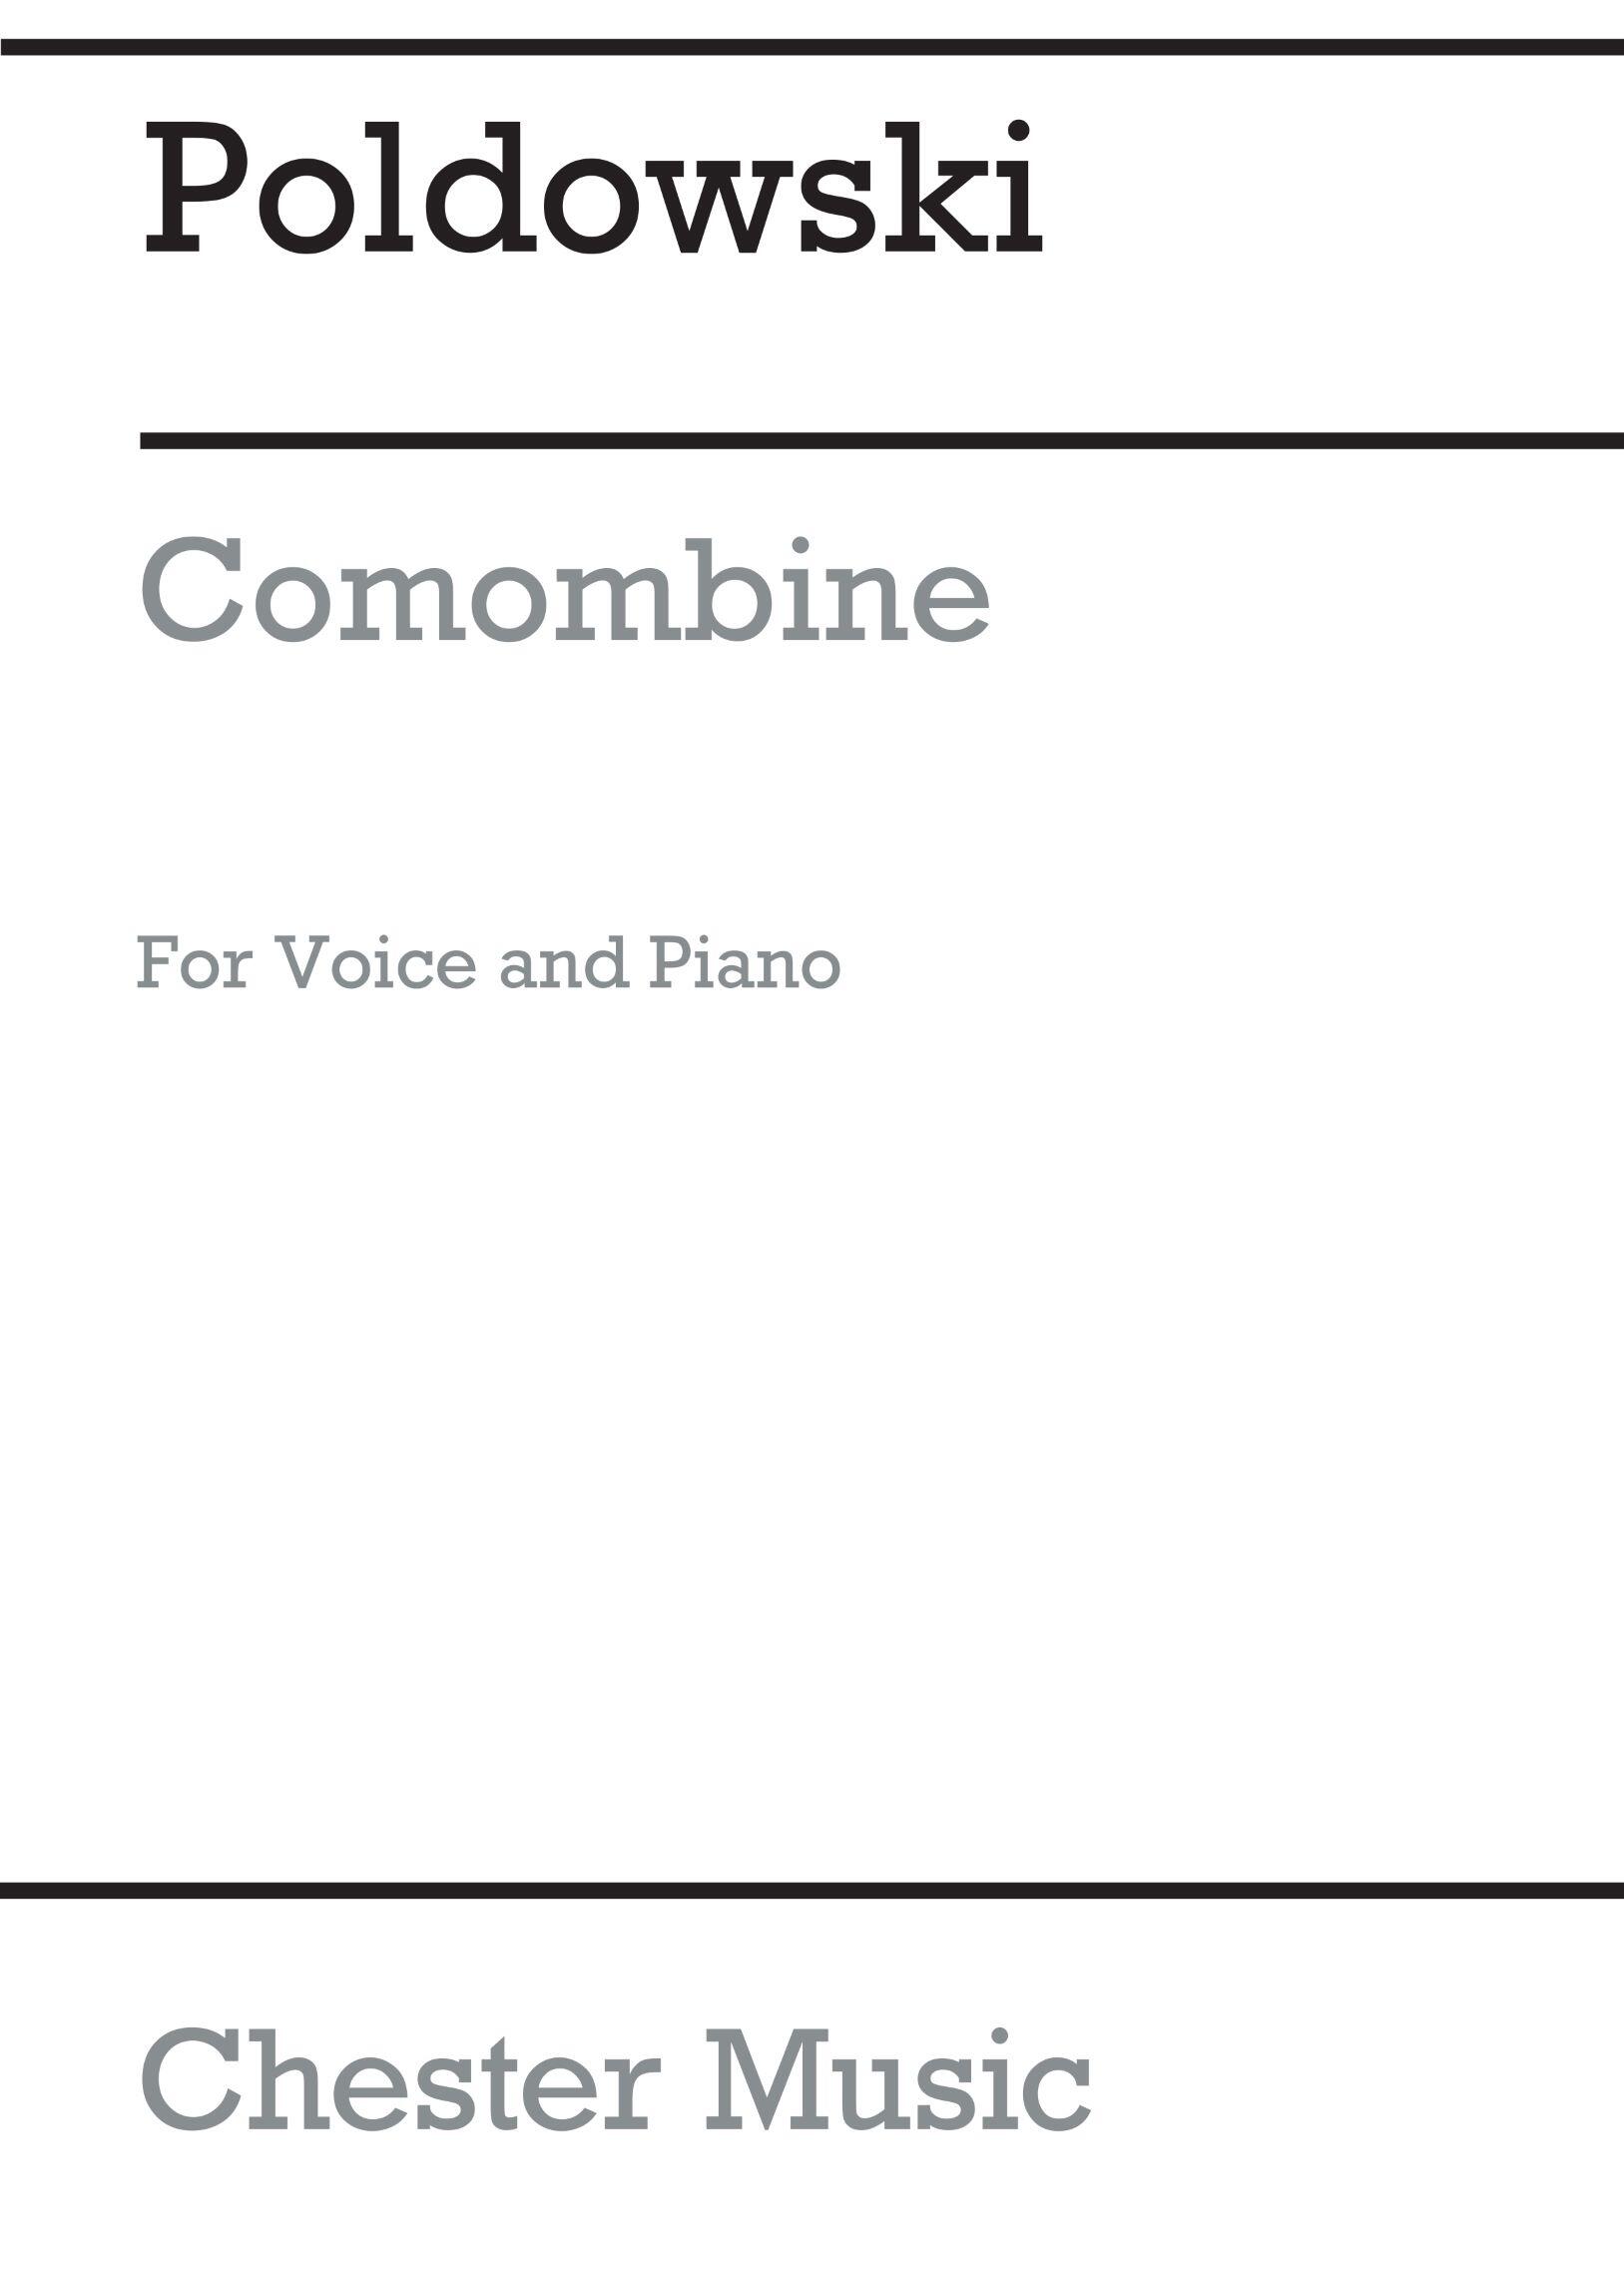 Colombine for Voice with Piano acc. : photo 1